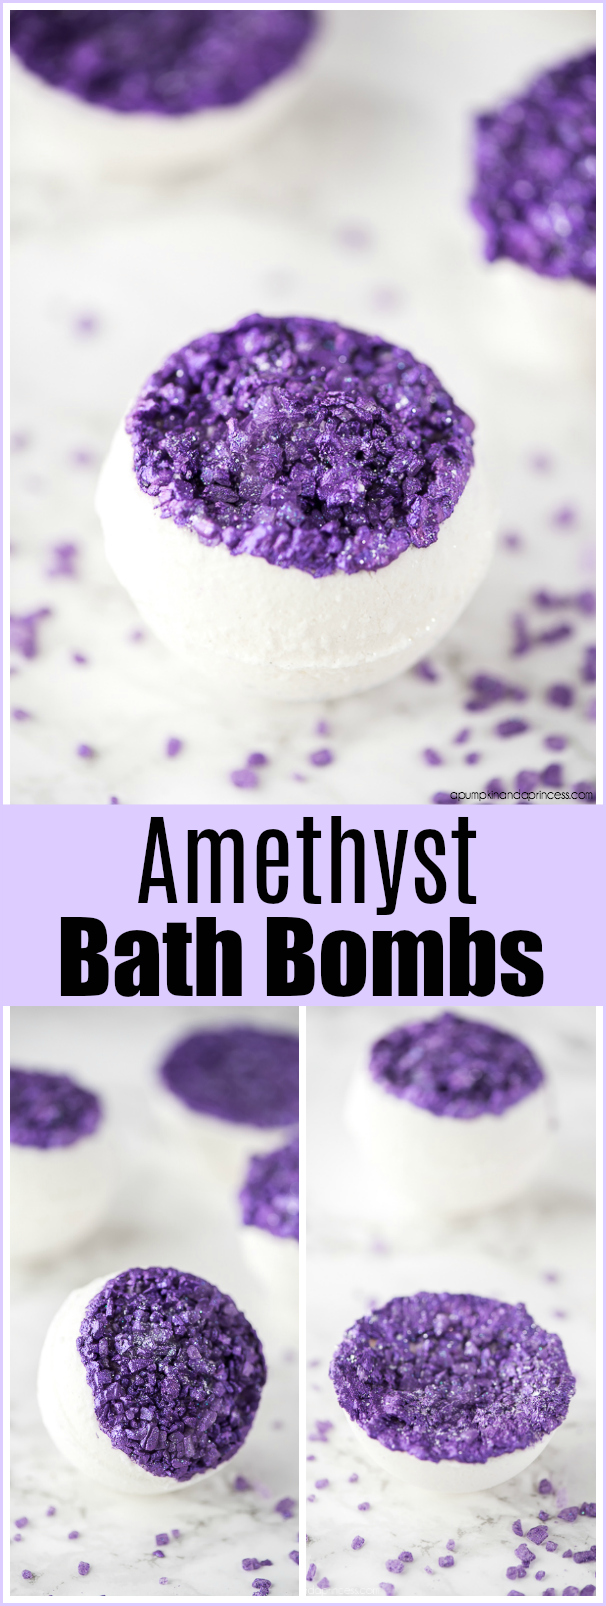 DIY Amethyst Bath Bombs – How to make bath bombs inspired by amethyst stones made with sea salts and lavender essential oil.